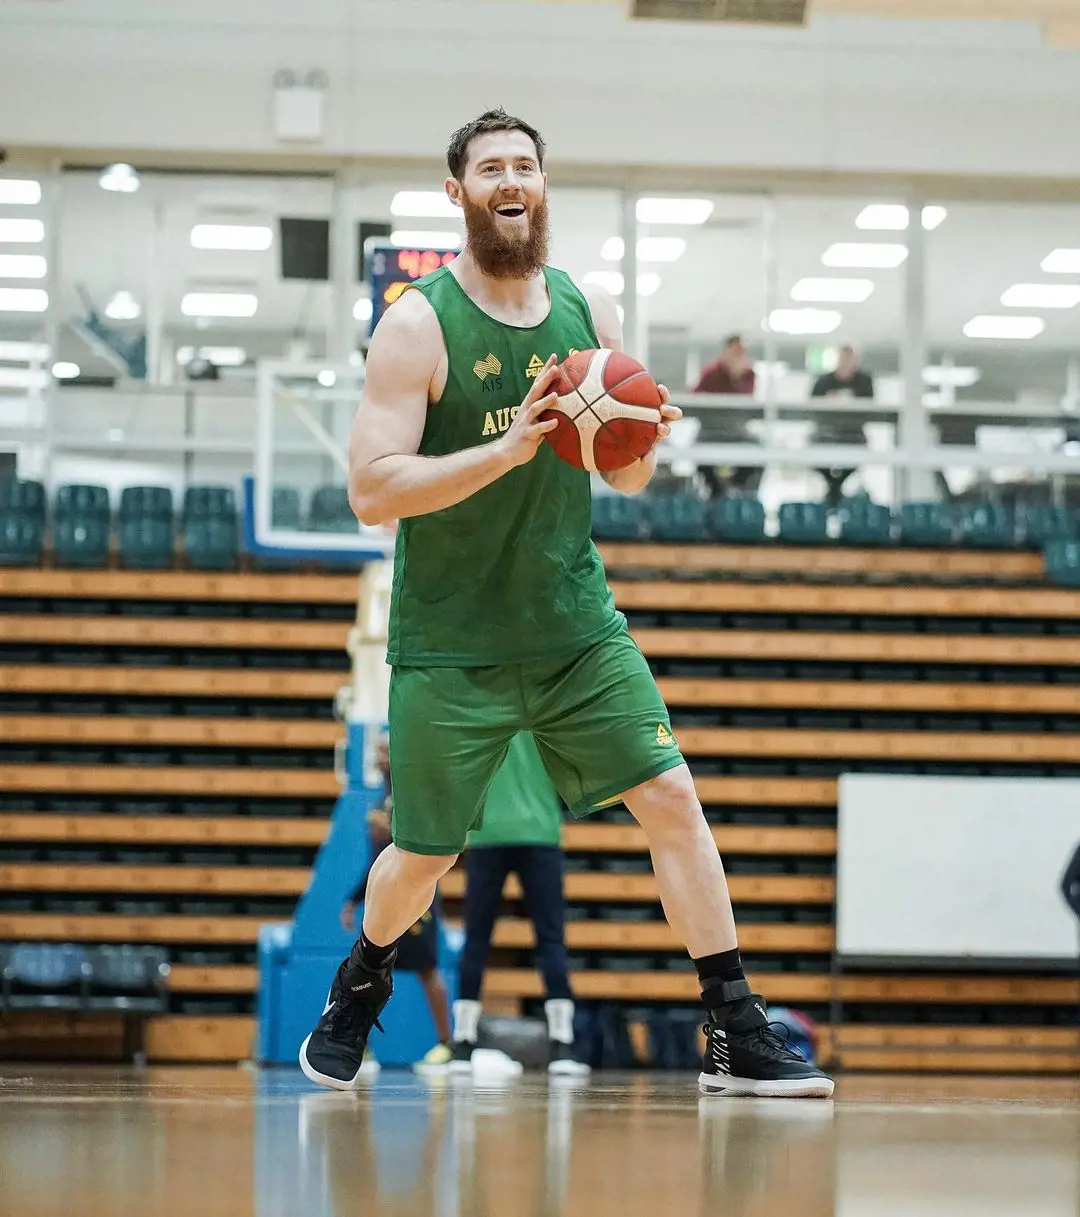 Aron playing for the Australian national team, the Boomers.